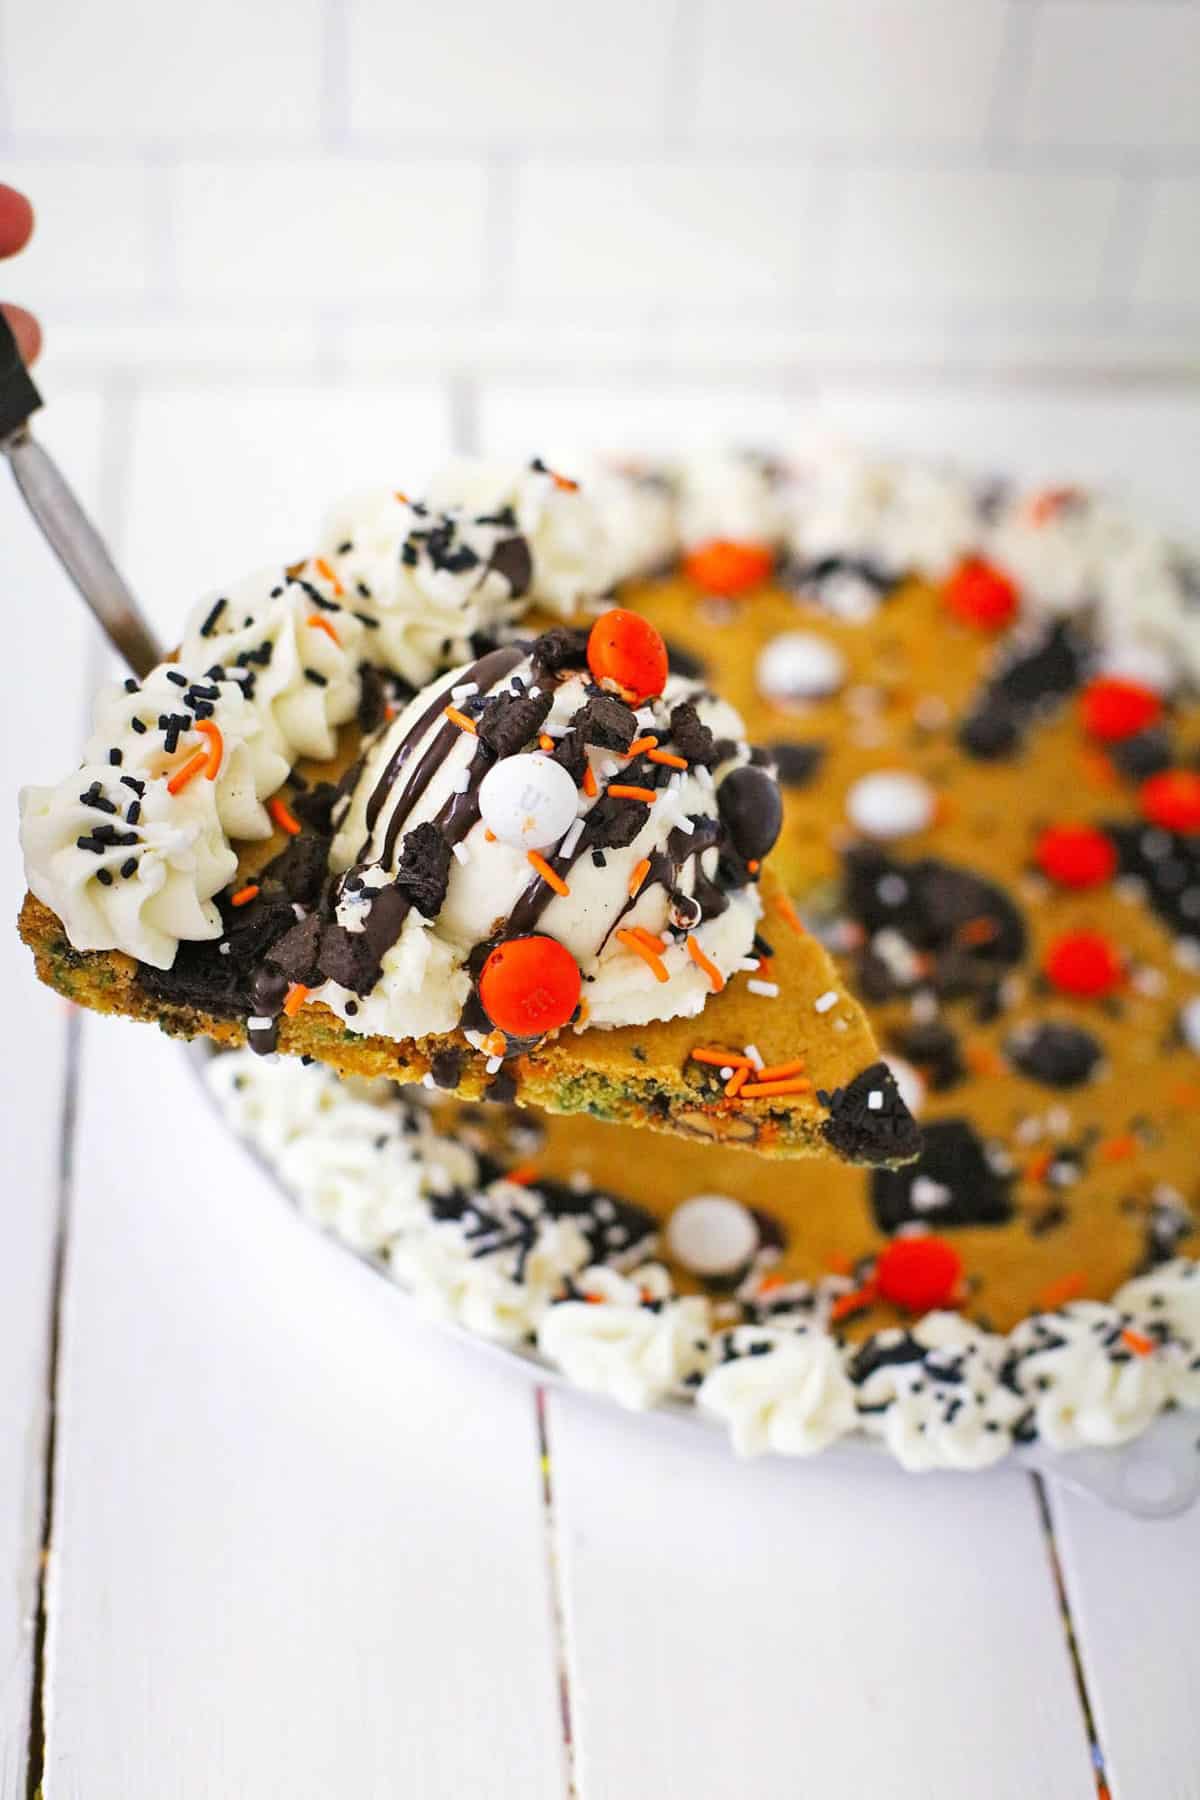 slicke of cookie pie with orange, white, and black decorations